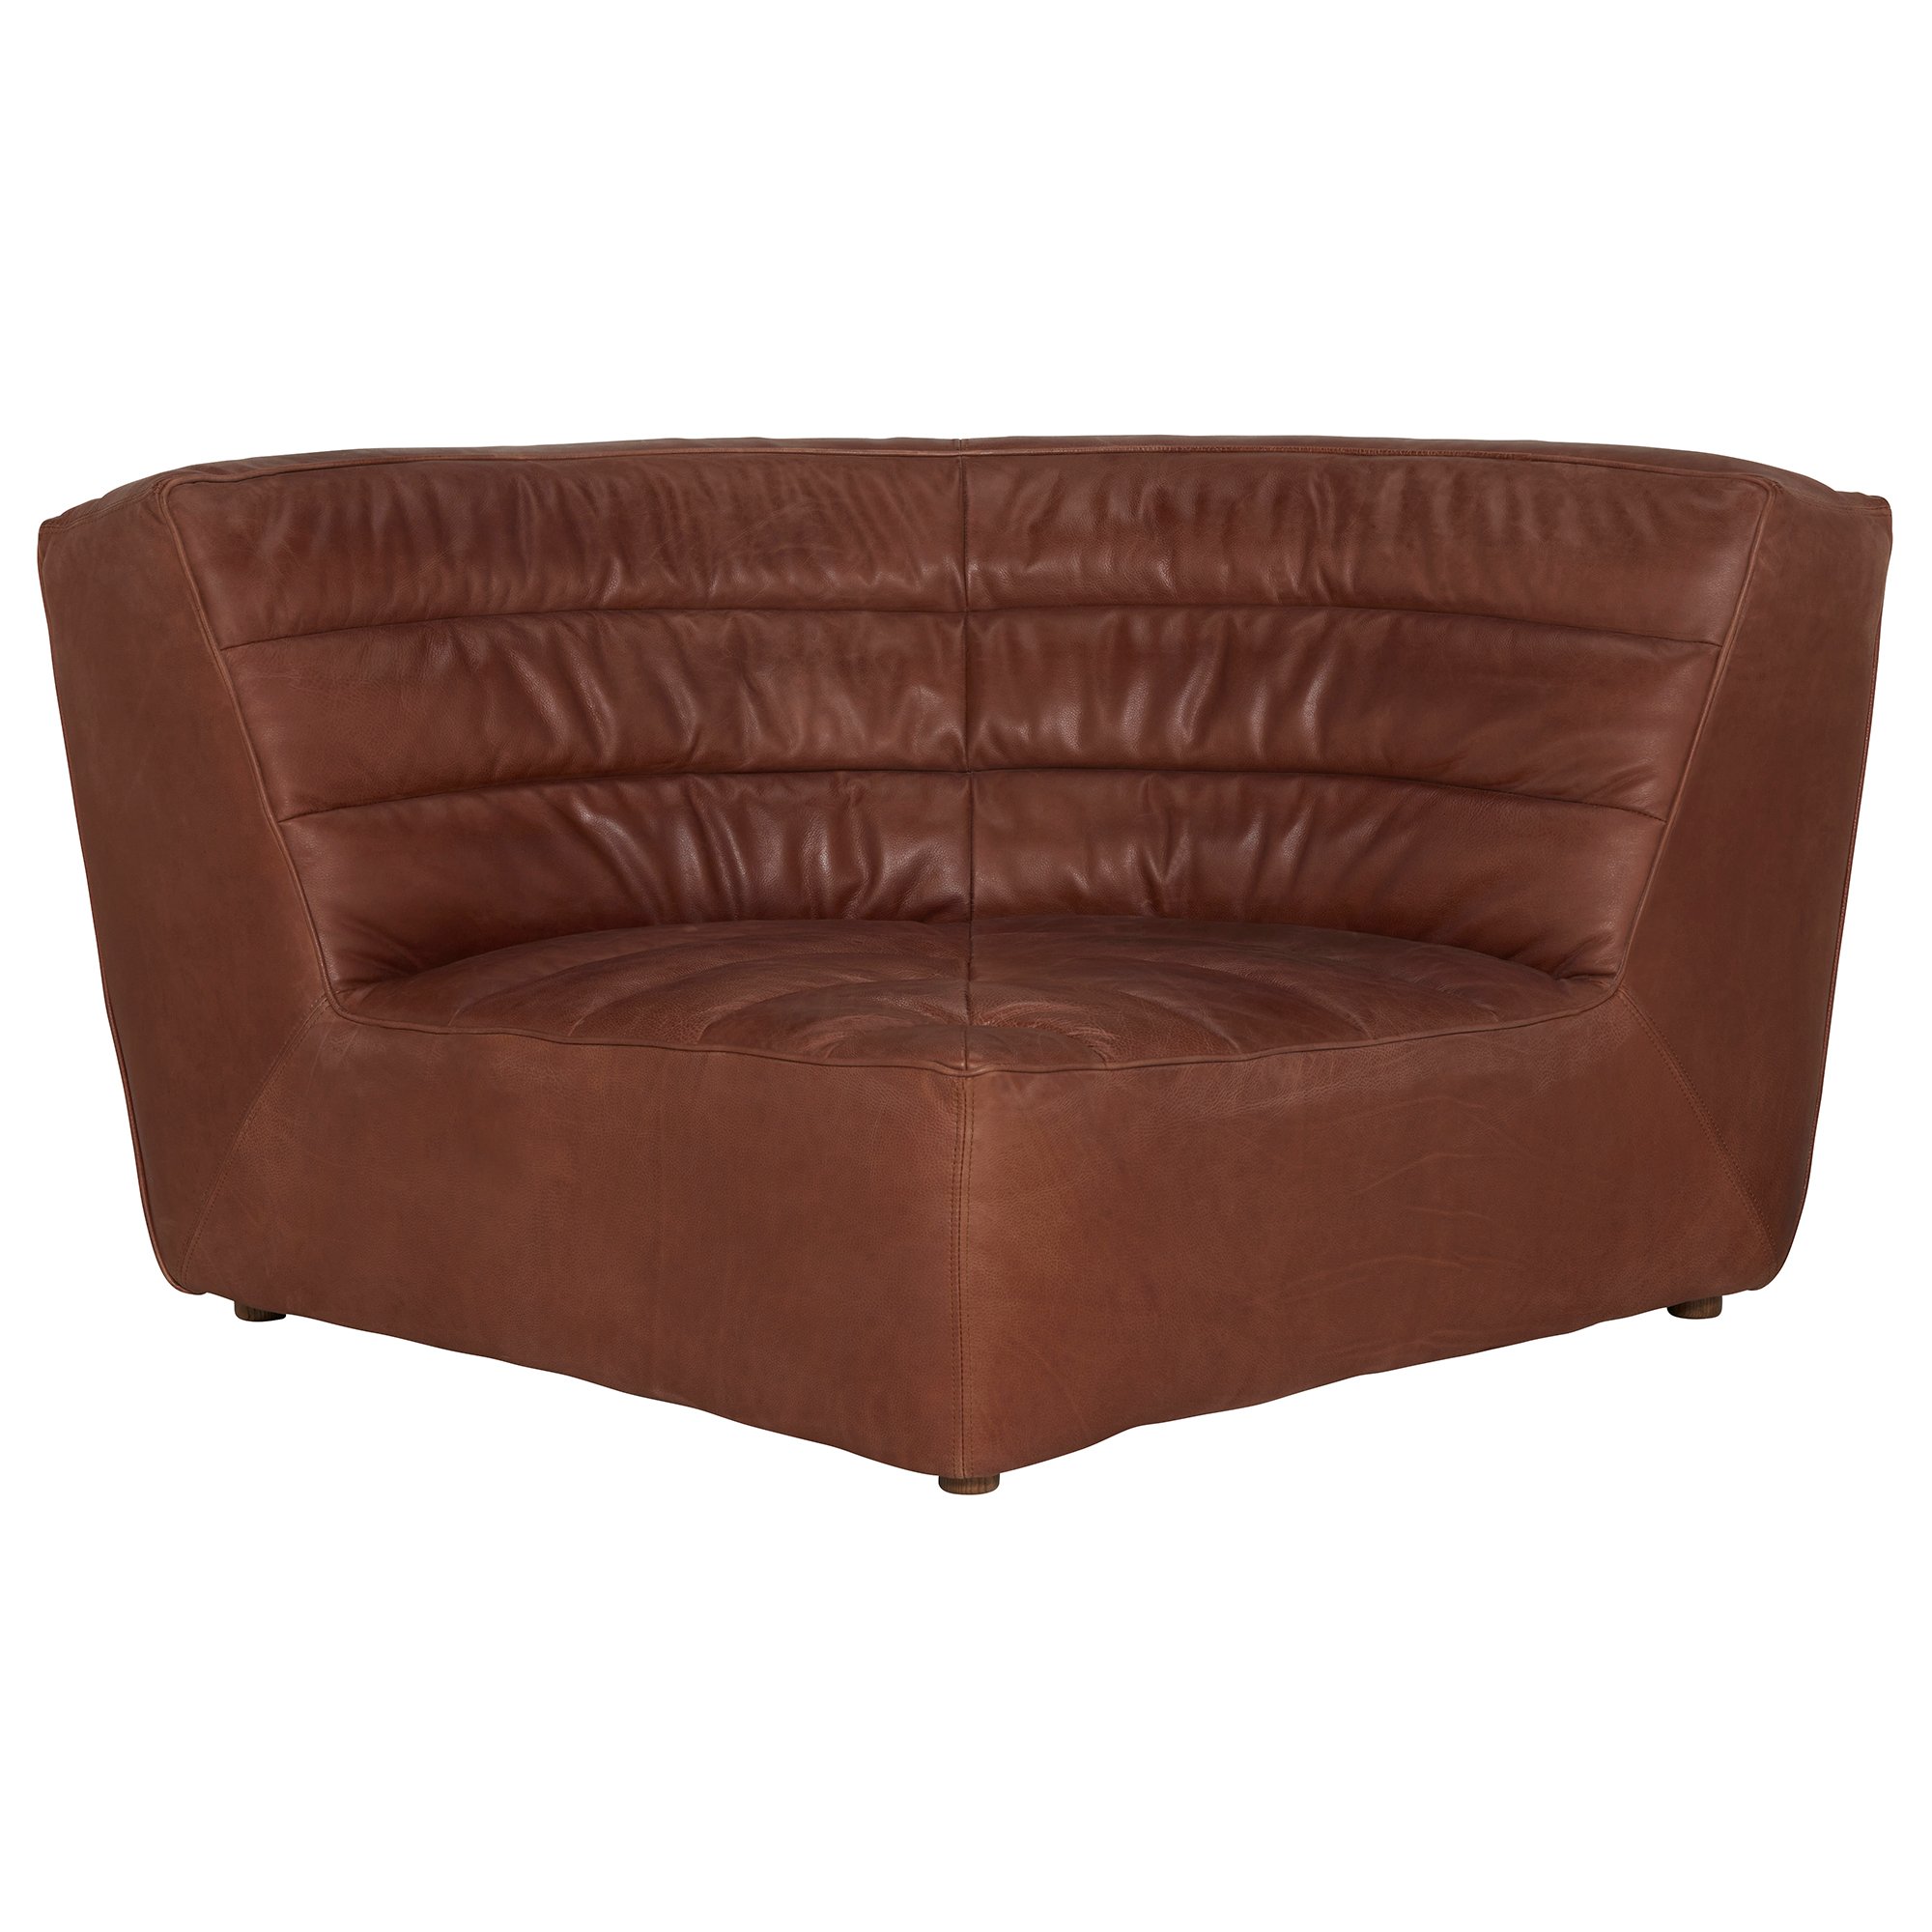 Timothy Oulton Shabby Sectional Corner Modular Sofa, Brown Leather | Barker & Stonehouse